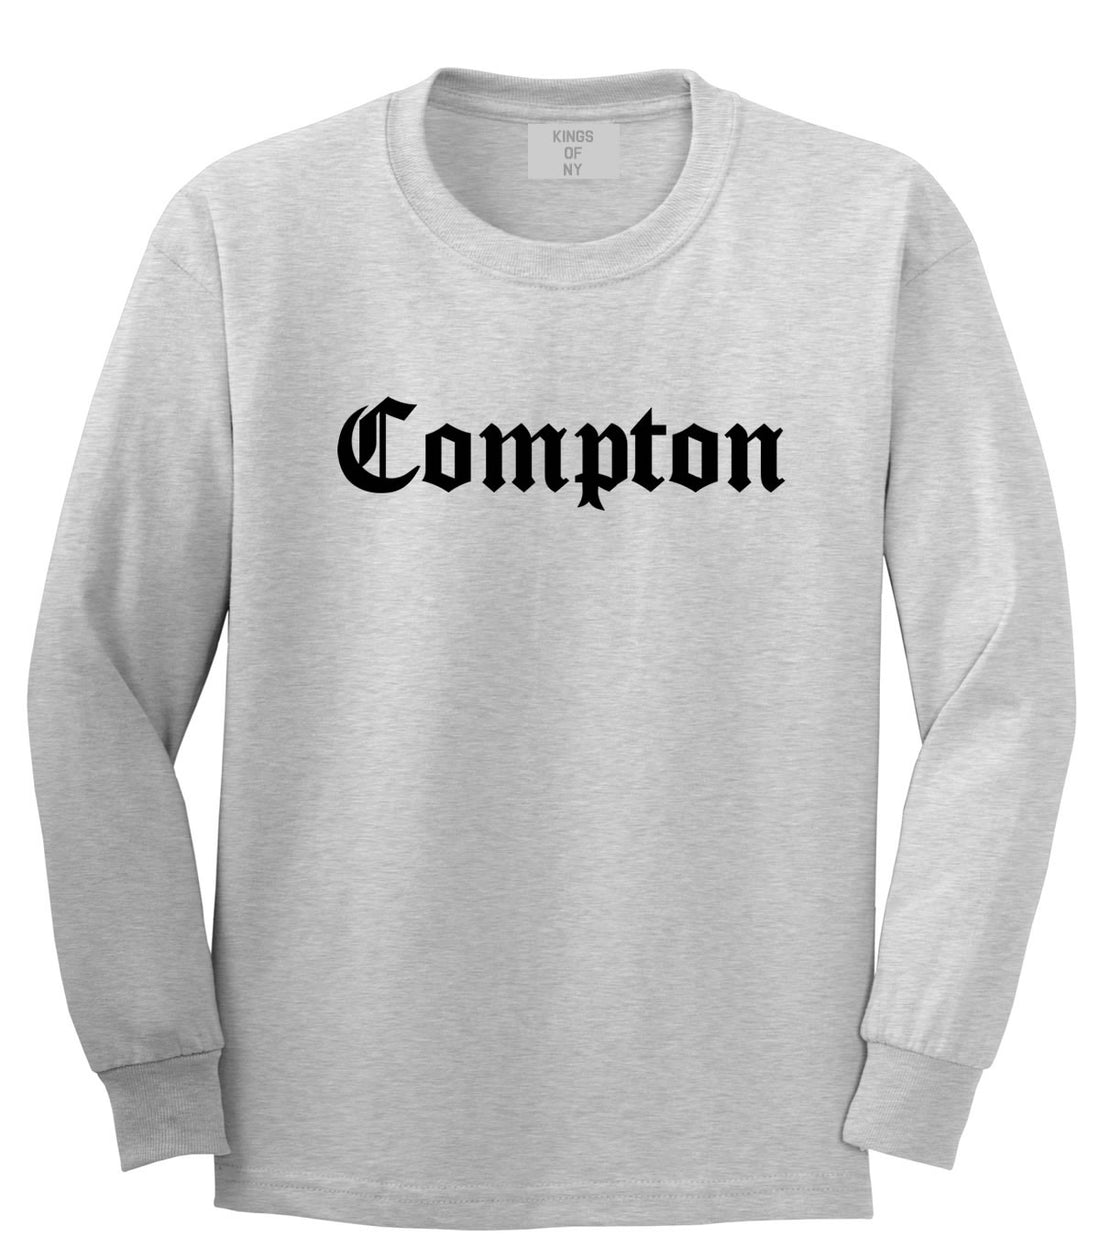 Kings Of NY Compton Long Sleeve T-Shirt in Grey